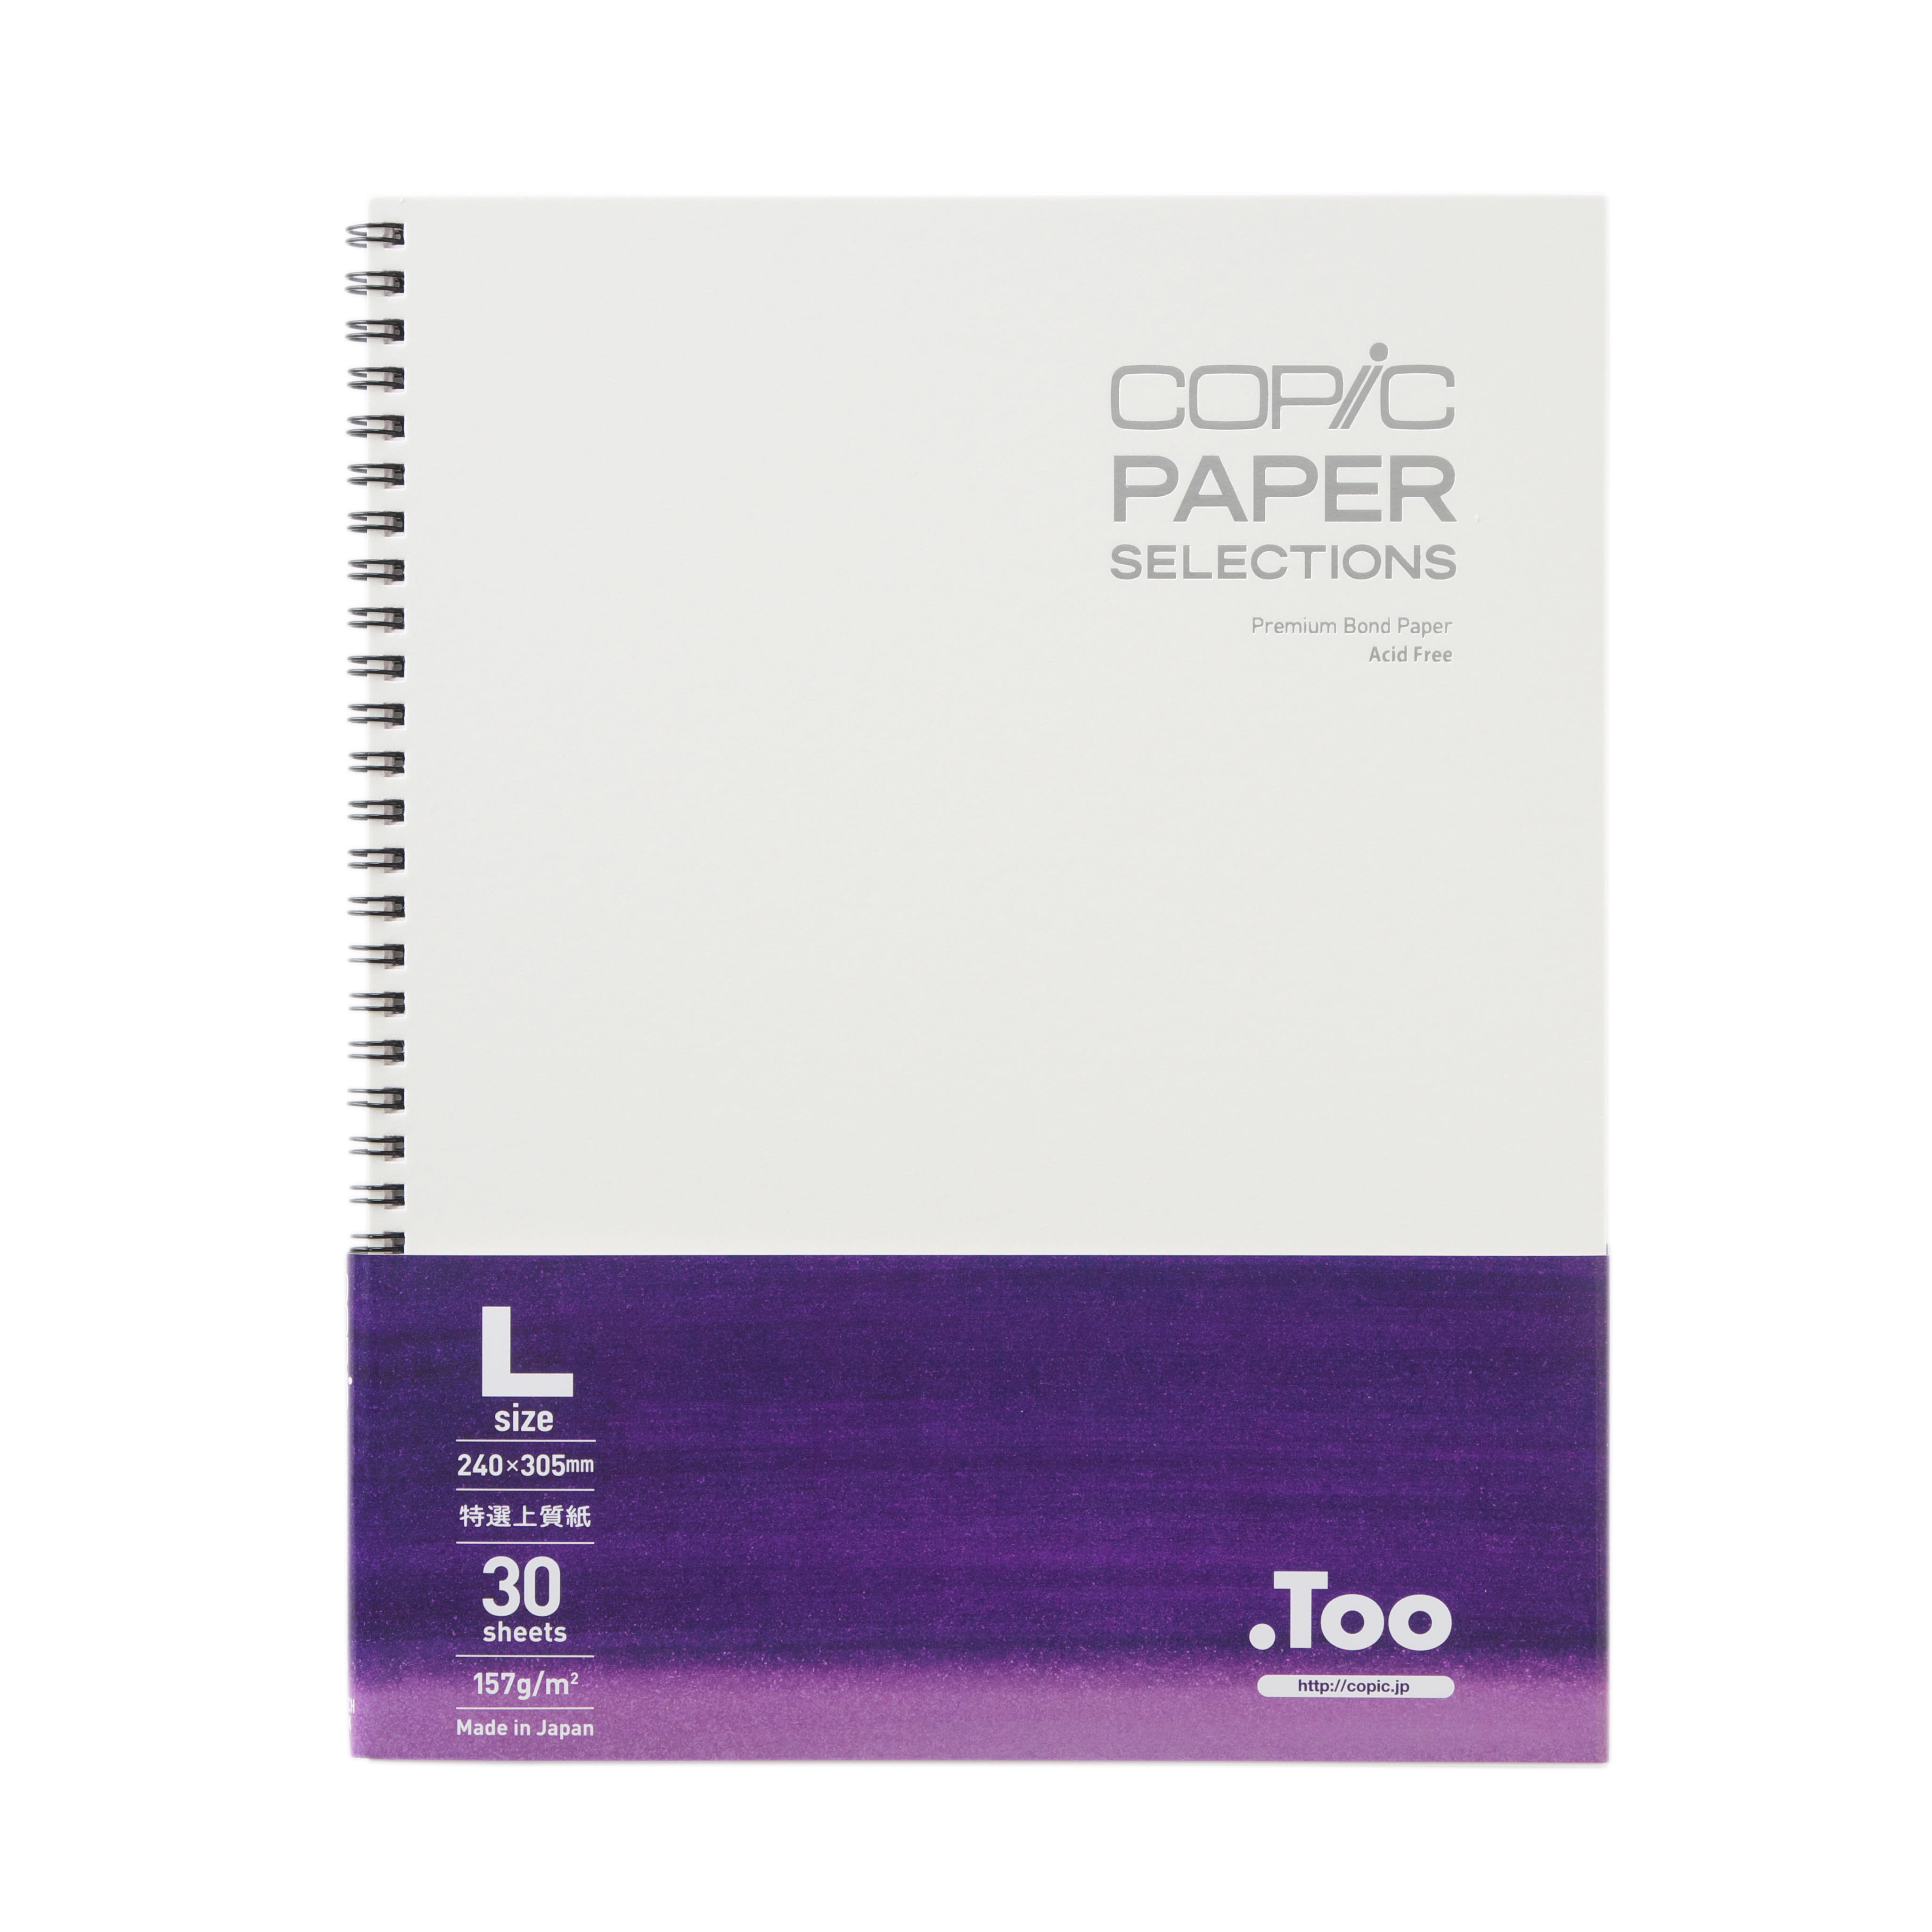 10 Best Sketchbooks for Copic Markers Reviewed & Rated in 2023